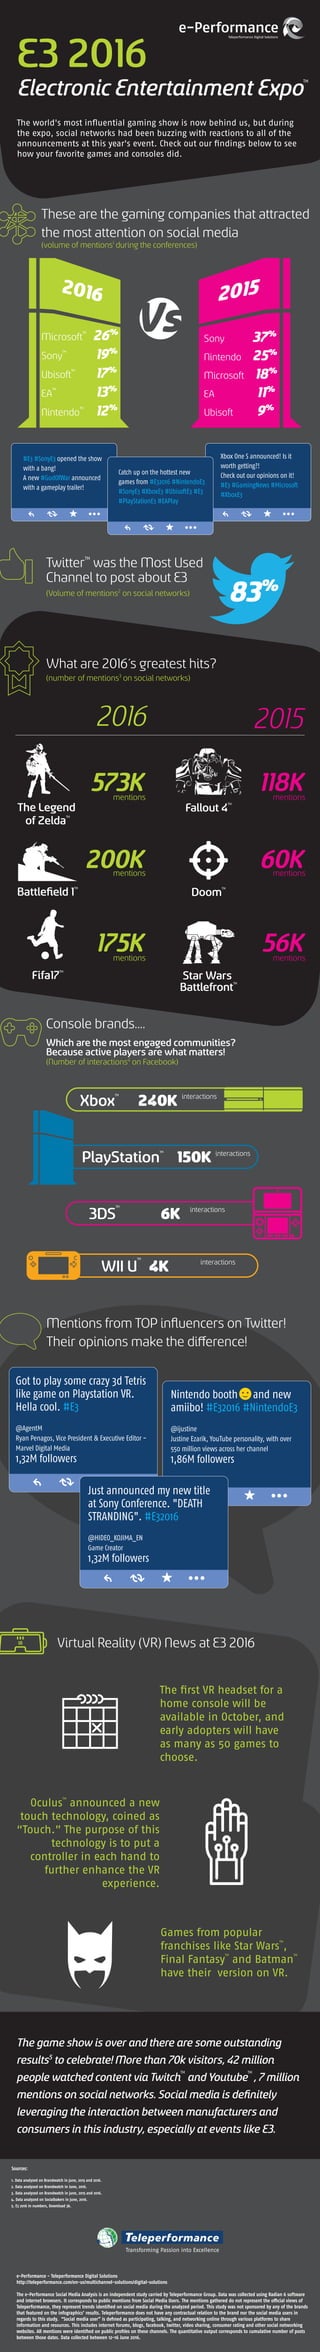 Mentions from TOP inﬂuencers on Twitter!
Their opinions make the diﬀerence!
The world's most inﬂuential gaming show is now behind us, but during
the expo, social networks had been buzzing with reactions to all of the
announcements at this year's event. Check out our ﬁndings below to see
how your favorite games and consoles did.
E3 2016
Electronic Entertainment ExpoTM
These are the gaming companies that attracted
the most attention on social media
(volume of mentions1
during the conferences)
2016 2015
Microsoft
TM
26%
Sony
TM
19%
Ubisoft
TM
17%
EA
TM
13%
Nintendo
TM
12%
Sony 37%
Nintendo 25%
Microsoft 18%
EA 11%
Ubisoft 9%
Console brands….
The ﬁrst VR headset for a
home console will be
available in October, and
early adopters will have
as many as 50 games to
choose.
Oculus
TM
announced a new
touch technology, coined as
“Touch.” The purpose of this
technology is to put a
controller in each hand to
further enhance the VR
experience.
Games from popular
franchises like Star Wars
TM
,
Final Fantasy
TM
and Batman
TM
have their version on VR.
Virtual Reality (VR) News at E3 2016
Which are the most engaged communities?
Because active players are what matters!
(Number of interactions4
on Facebook)
PlayStation
TM
150K
Xbox
TM
240K
WII U
TM
4K
3DS
TM
6K
interactions
interactions
interactions
interactions
Vs
(Volume of mentions2
on social networks)
#E3 #SonyE3 opened the show
with a bang!
A new #GodOfWar announced
with a gameplay trailer!
Xbox One S announced! Is it
worth getting?!
Check out our opinions on it!
#E3 #GamingNews #Microsoft
#XboxE3
Catch up on the hottest new
games from #E32016 #NintendoE3
#SonyE3 #XboxE3 #UbisoftE3 #E3
#PlayStationE3 #EAPlay
What are 2016´s greatest hits?
(number of mentions3
on social networks)
2016
573K
200K
175K
2015
The Legend
of ZeldaTM
Battleﬁeld 1TM
Fifa17TM
118K
60K
56K
Fallout 4TM
DoomTM
Star Wars
BattlefrontTM
mentions mentions
mentions mentions
mentions mentions
e-Performance - Teleperformance Digital Solutions
http://teleperformance.com/en-us/multichannel-solutions/digital-solutions
The e-Performance Social Media Analysis is an independent study carried by Teleperformance Group. Data was collected using Radian 6 software
and internet browsers. It corresponds to public mentions from Social Media Users. The mentions gathered do not represent the oﬃcial views of
Teleperformance, they represent trends identiﬁed on social media during the analyzed period. This study was not sponsored by any of the brands
that featured on the infographics’ results. Teleperformance does not have any contractual relation to the brand nor the social media users in
regards to this study. “Social media user” is deﬁned as participating, talking, and networking online through various platforms to share
information and resources. This includes internet forums, blogs, facebook, twitter, video sharing, consumer rating and other social networking
websites. All mentions were identiﬁed on public proﬁles on these channels. The quantitative output corresponds to cumulative number of posts
between those dates. Data collected between 12-16 June 2016.
1. Data analyzed on Brandwatch in june, 2015 and 2016.
2. Data analyzed on Brandwatch in June, 2016.
3. Data analyzed on Brandwatch in june, 2015 and 2016.
4. Data analyzed on Socialbakers in june, 2016.
5. E3 2016 in numbers, Download 3k.
Sources:
Got to play some crazy 3d Tetris
like game on Playstation VR.
Hella cool. #E3
@AgentM
Ryan Penagos, Vice President & Executive Editor -
Marvel Digital Media
1,32M followers
Nintendo booth and new
amiibo! #E32016 #NintendoE3
@ijustine
Justine Ezarik, YouTube personality, with over
550 million views across her channel
1,86M followers
Just announced my new title
at Sony Conference. "DEATH
STRANDING". #E32016
@HIDEO_KOJIMA_EN
Game Creator
1,32M followers
The game show is over and there are some outstanding
results5
to celebrate! More than 70k visitors, 42 million
people watched content via Twitch
TM
and Youtube
TM
, 7 million
mentions on social networks. Social media is deﬁnitely
leveraging the interaction between manufacturers and
consumers in this industry, especially at events like E3.
TwitterTM
was the Most Used
Channel to post about E3
 